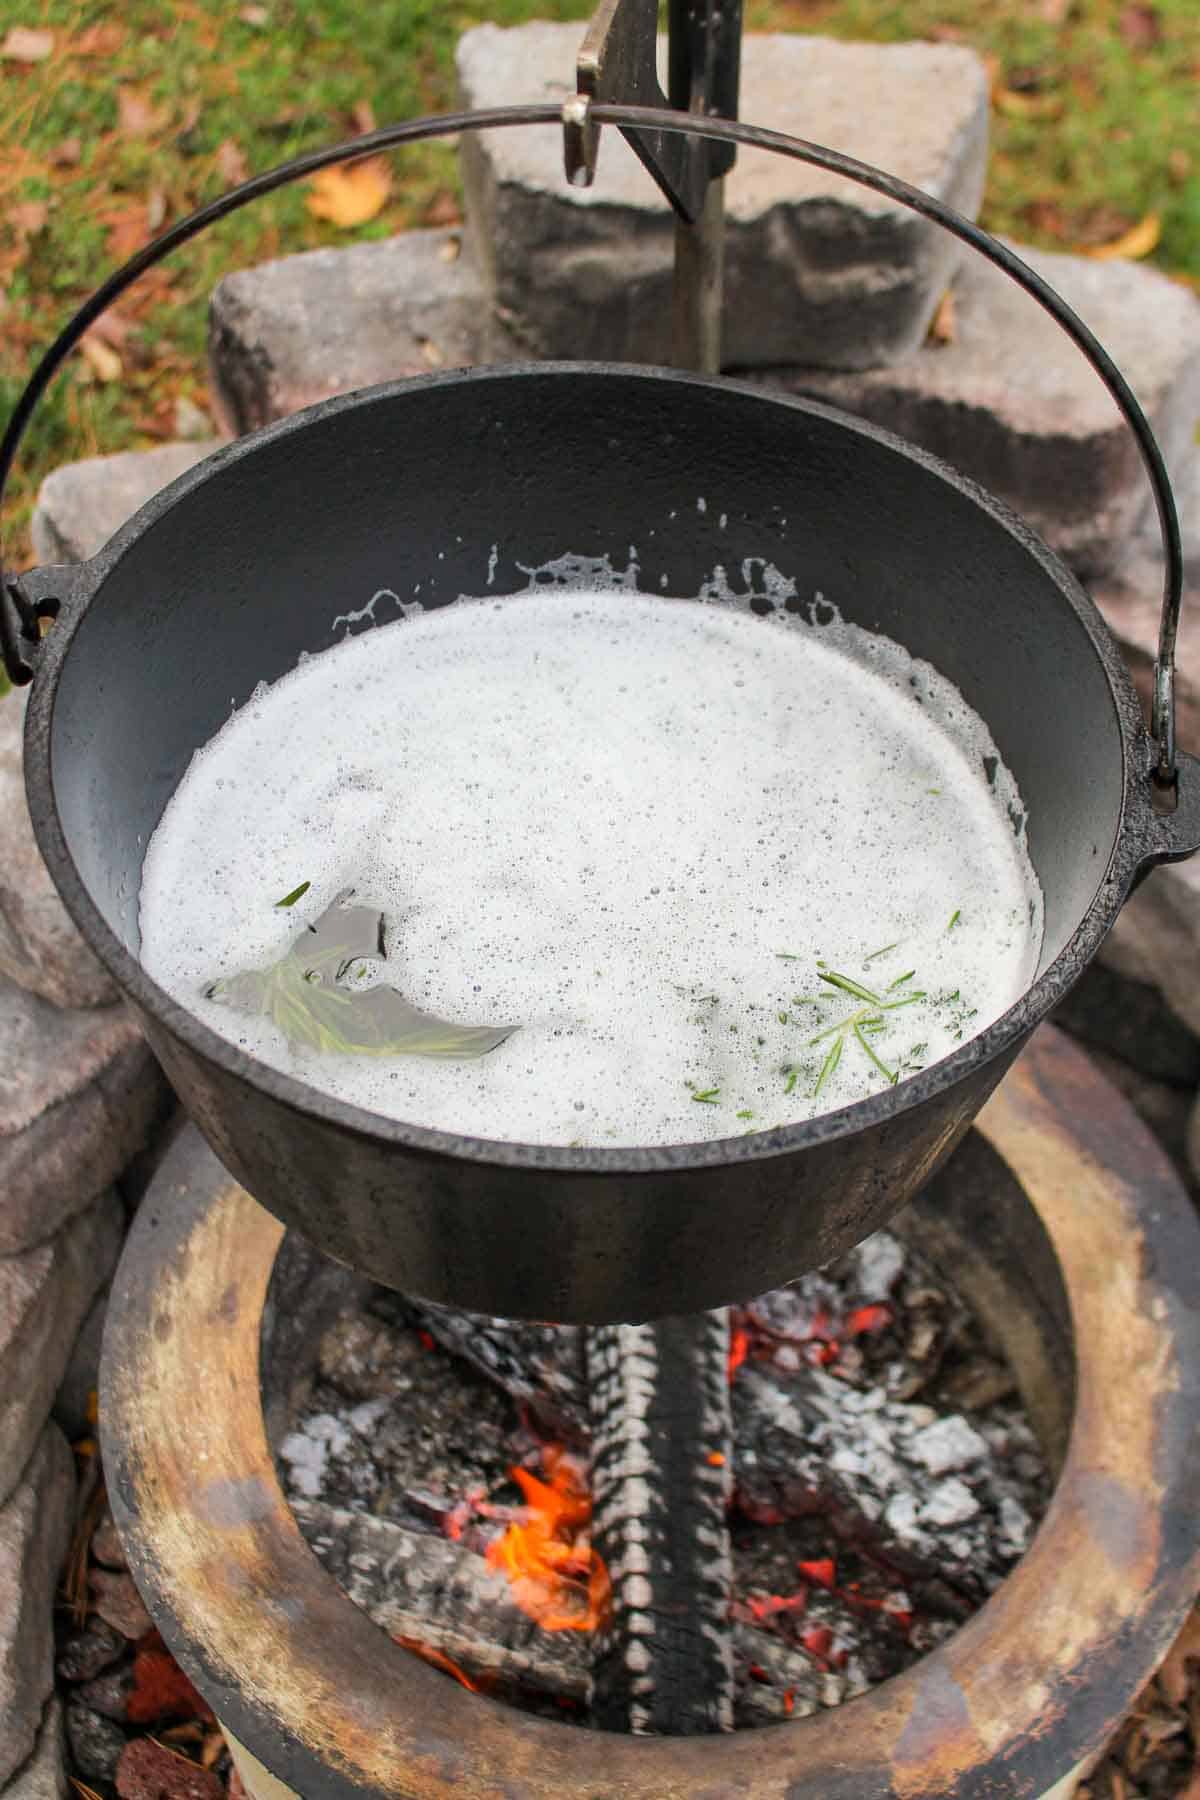 The beef tallow melting in the dutch oven.